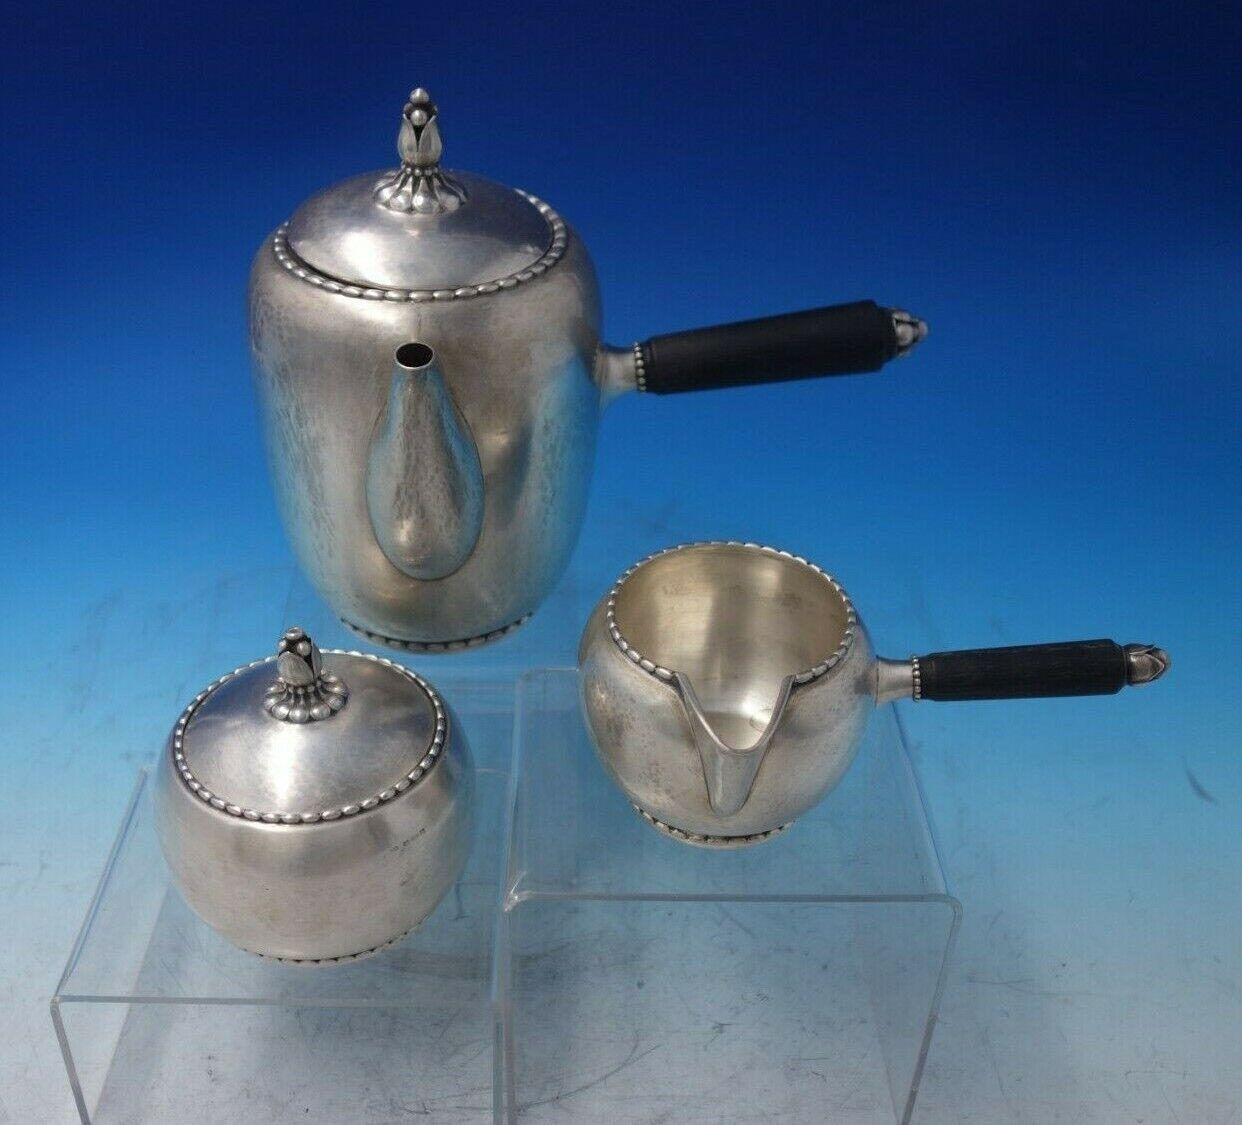 Beaded by Georg Jensen

Outstanding Beaded by Georg Jensen sterling silver three-piece chocolate pot set with GI marks featuring ebony handles. This set is marked #187 and includes:

1 - Chocolate Pot: Measures 8 1/4